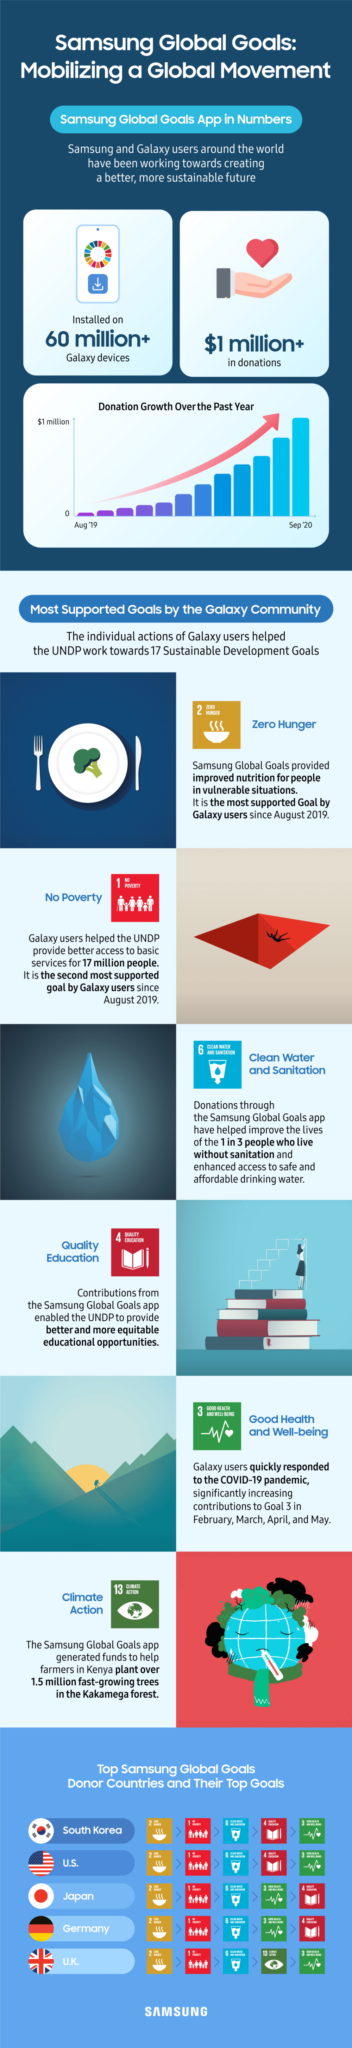 The Samsung Galaxy Community Raised $1M to Support the Global Goals